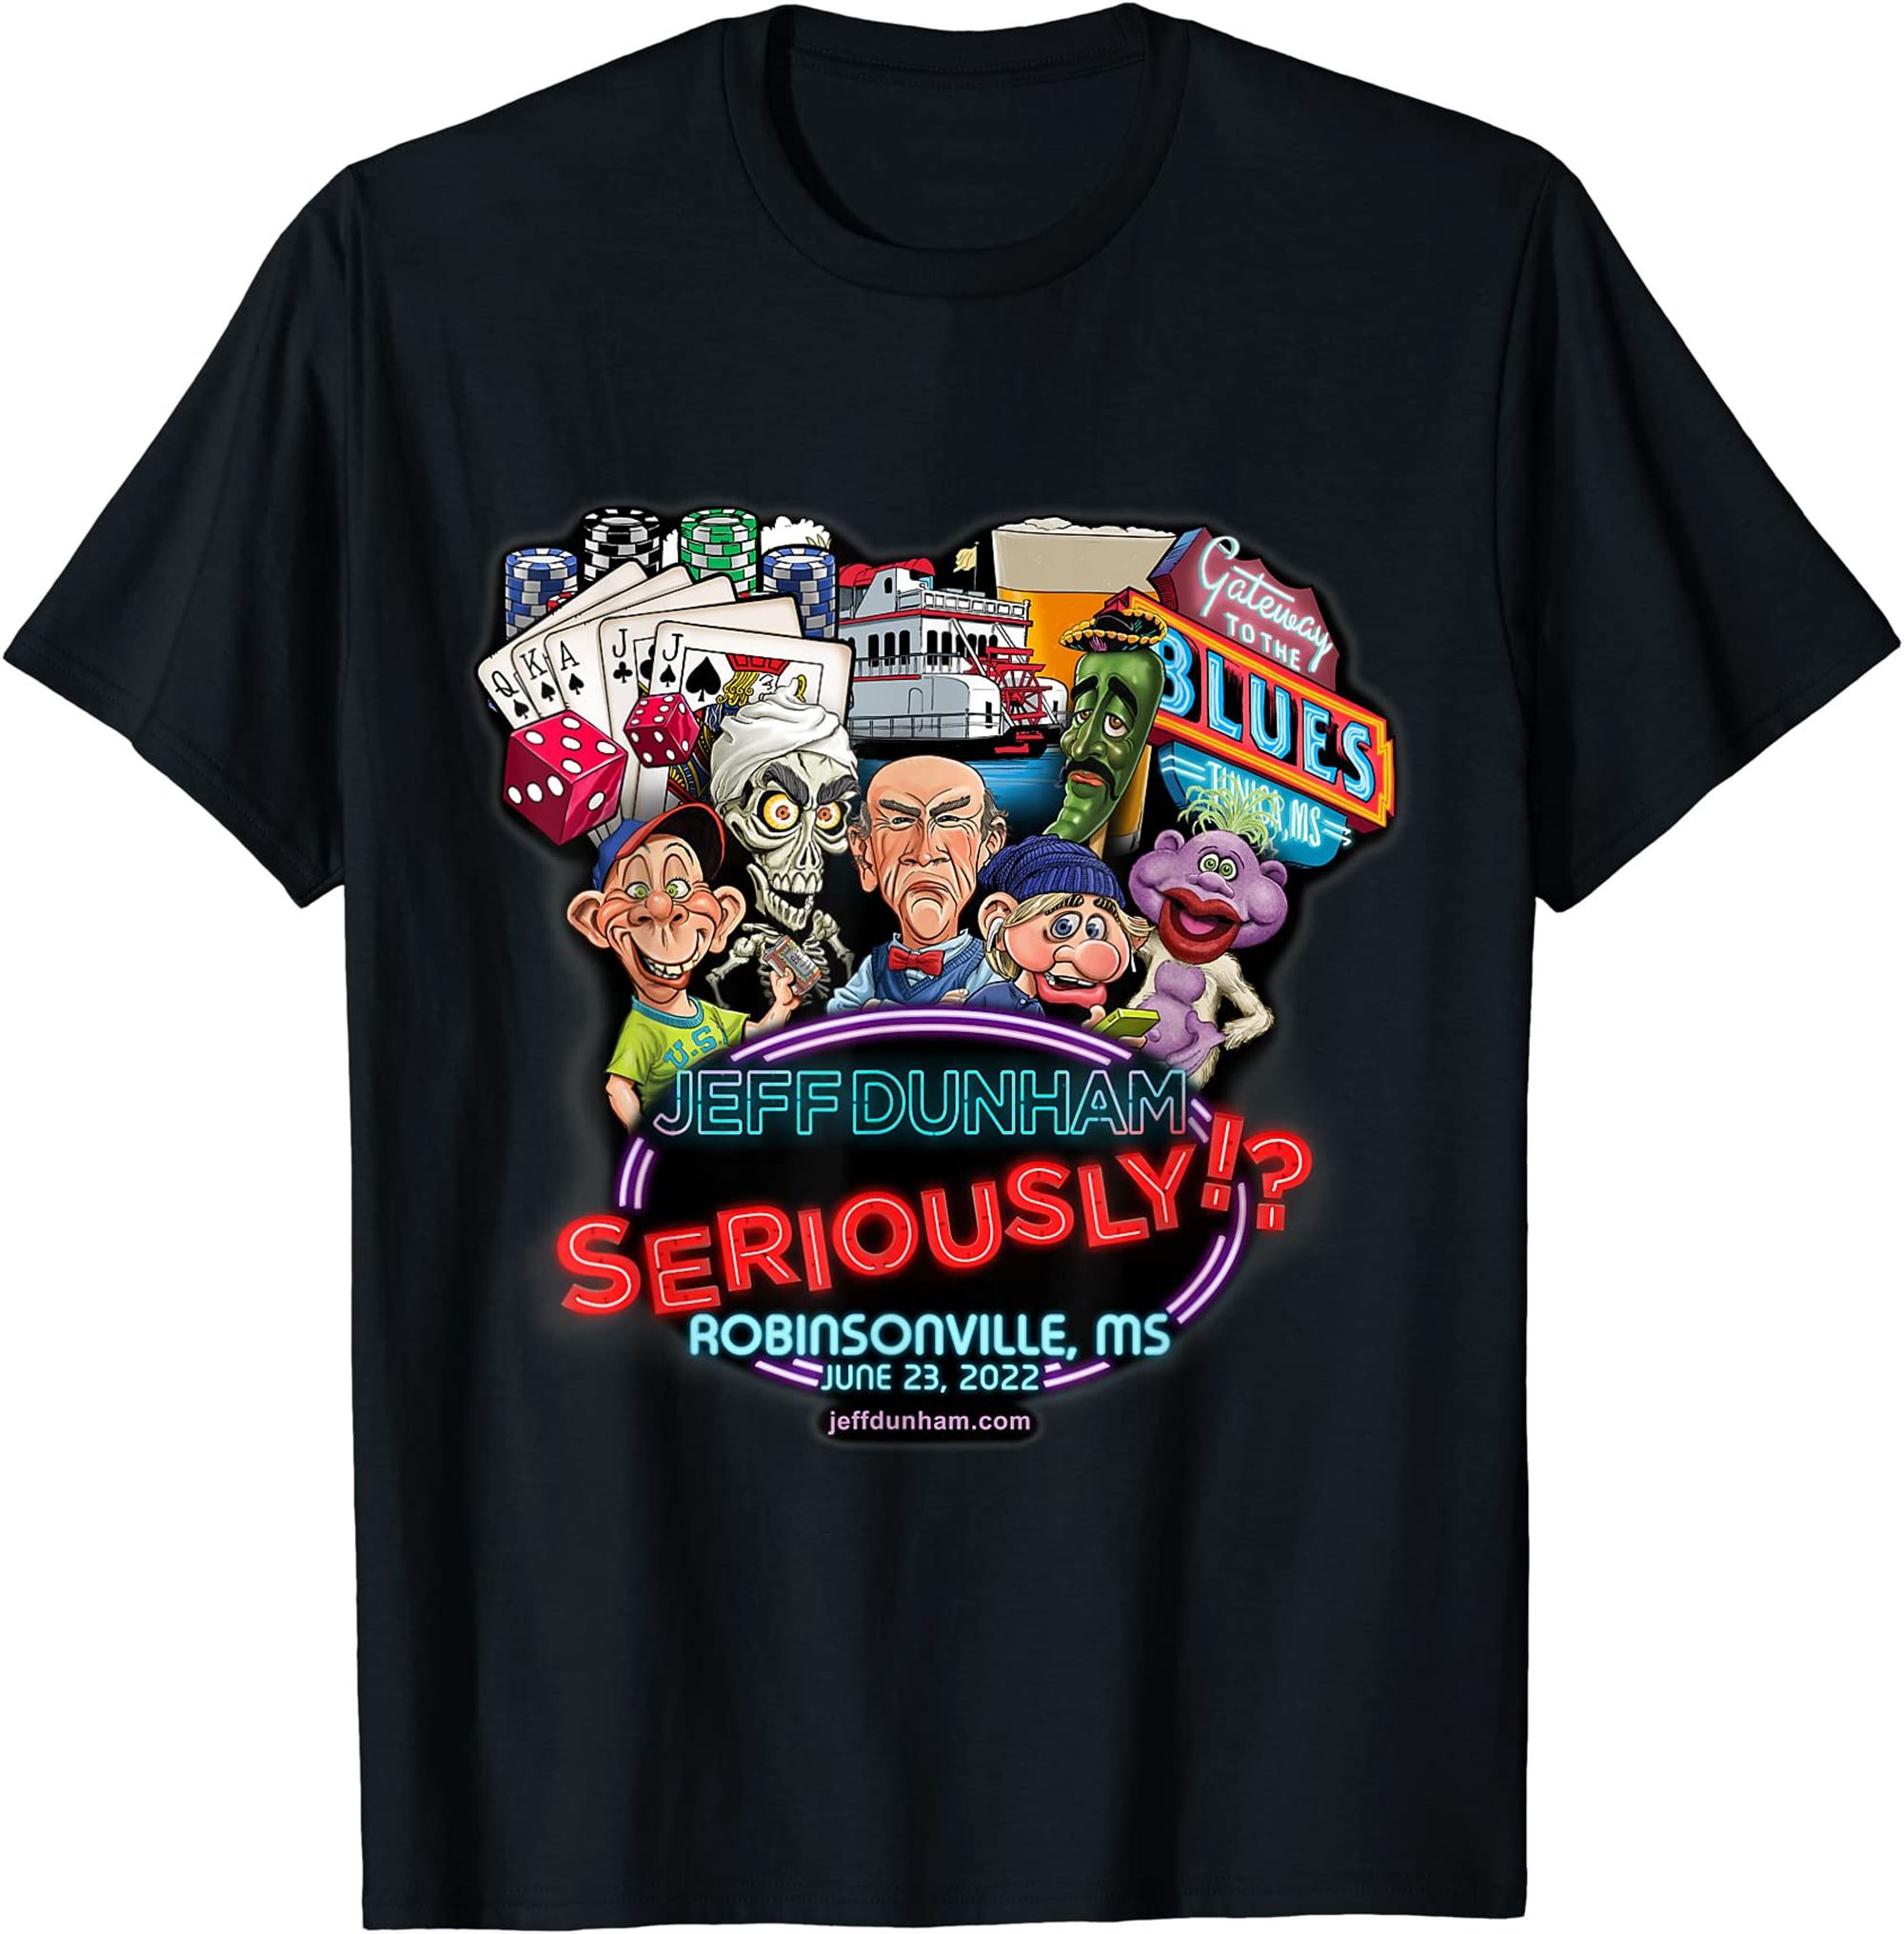 Jeff Dunham Robinsonville Ms 2022 T-shirt Full Size Up To 5xl